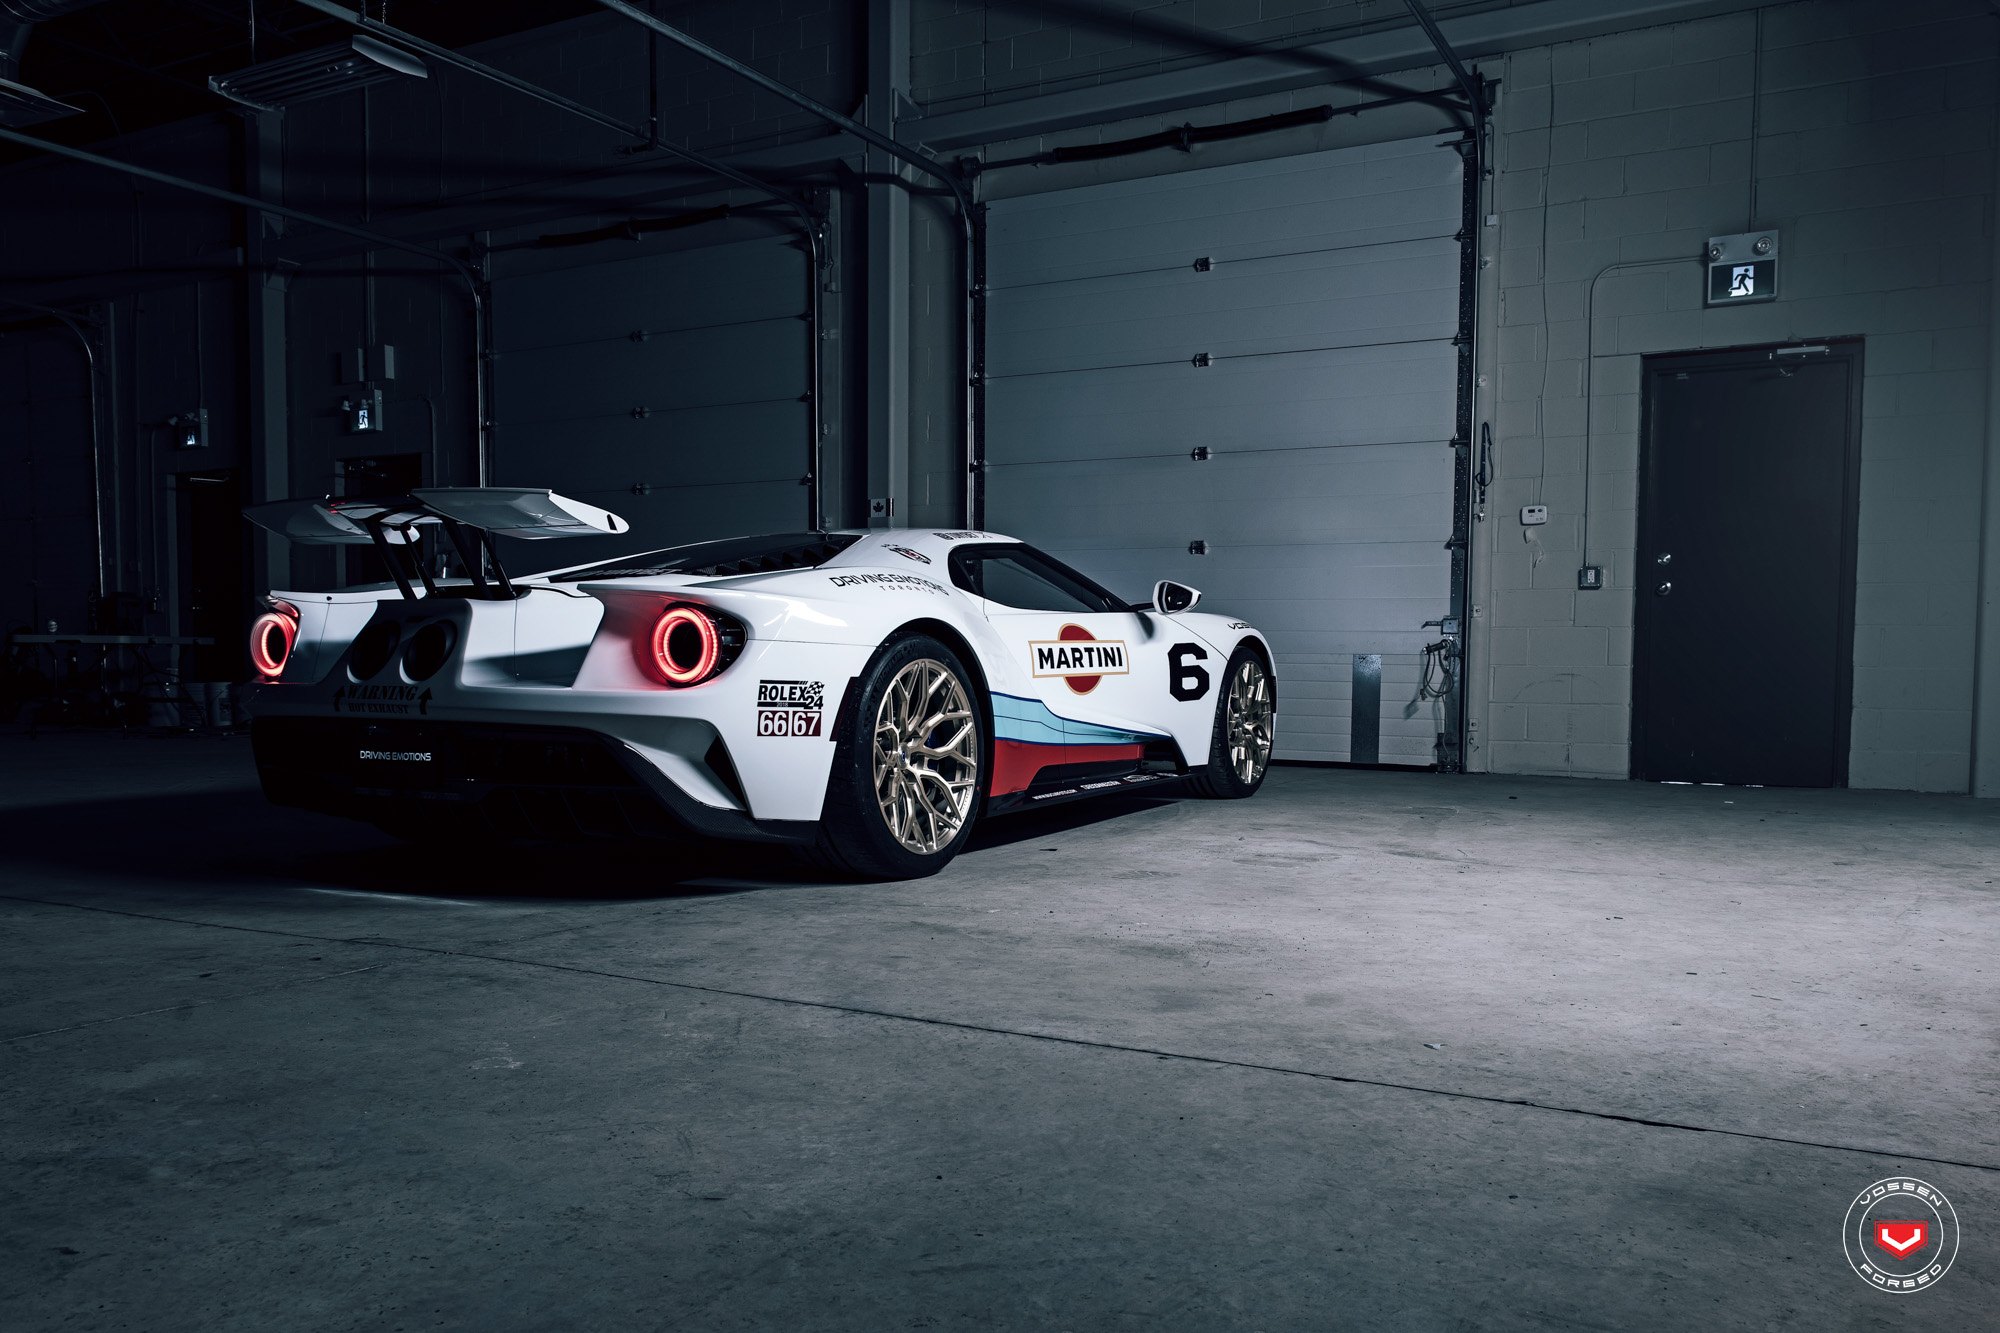 Carbon Fiber Rear Diffuser on White Debadged Ford GT - Photo by Vossen